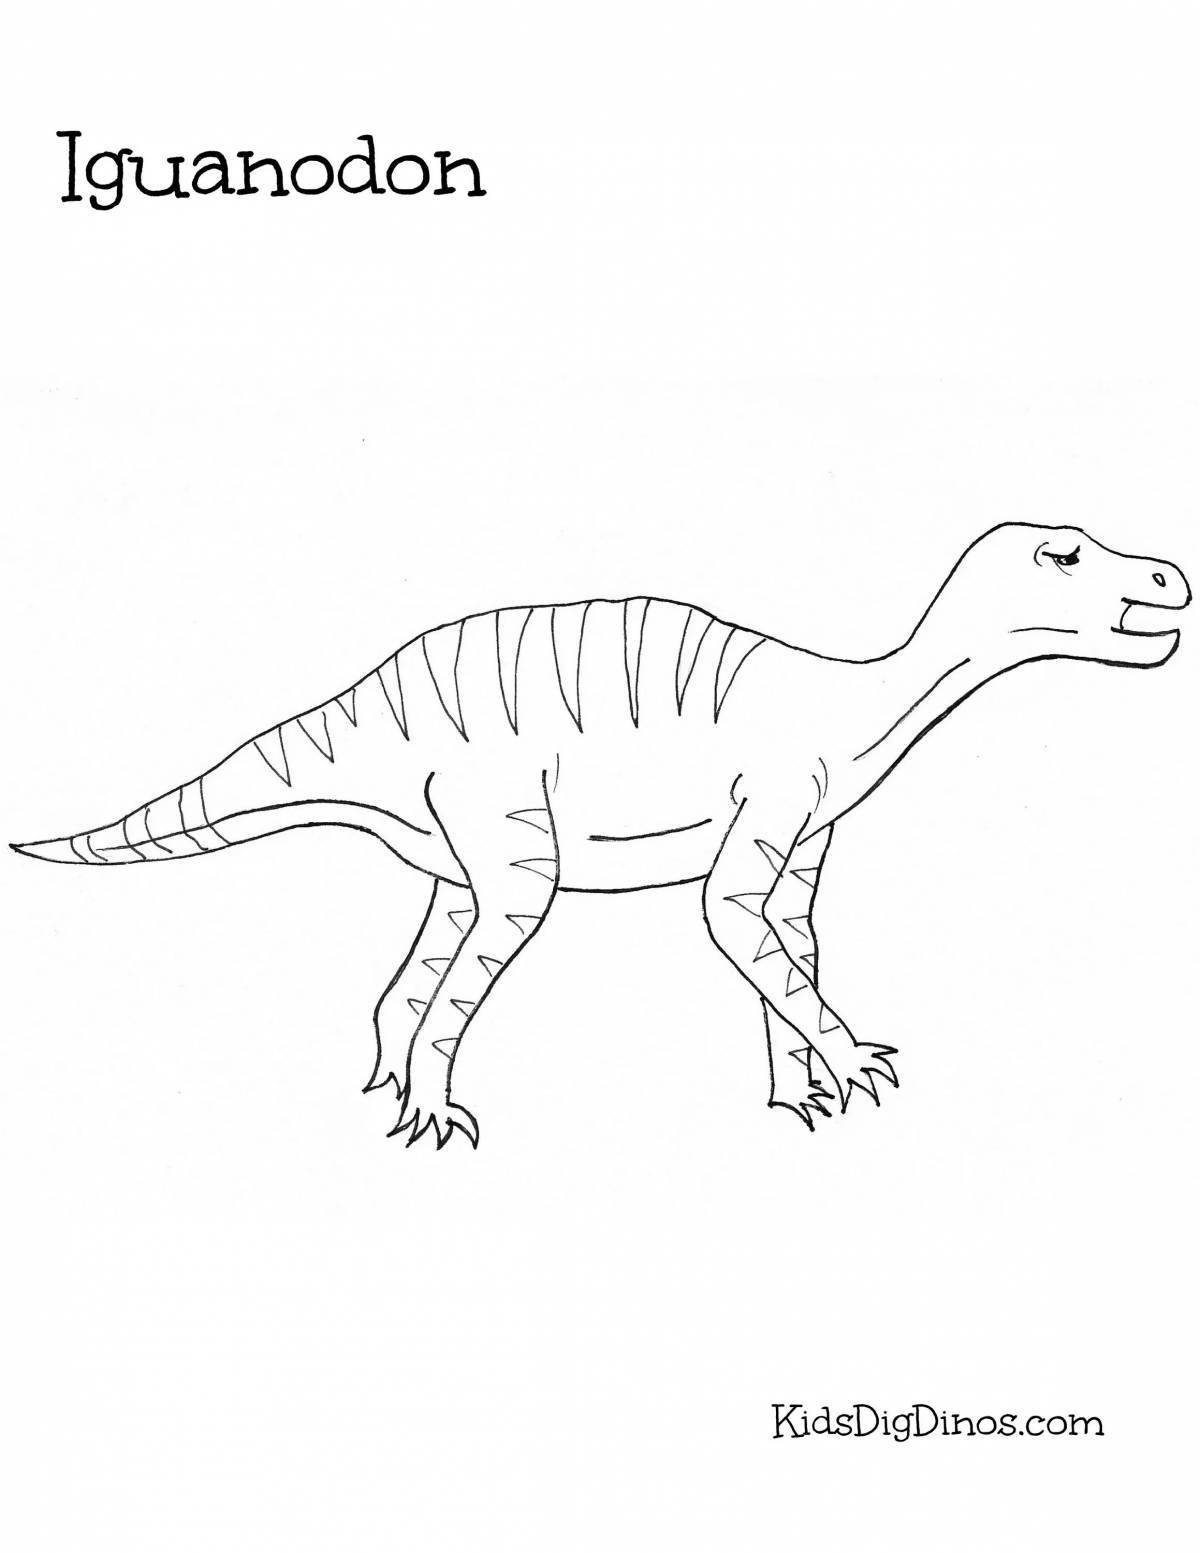 Iguanodon Animated Coloring Page